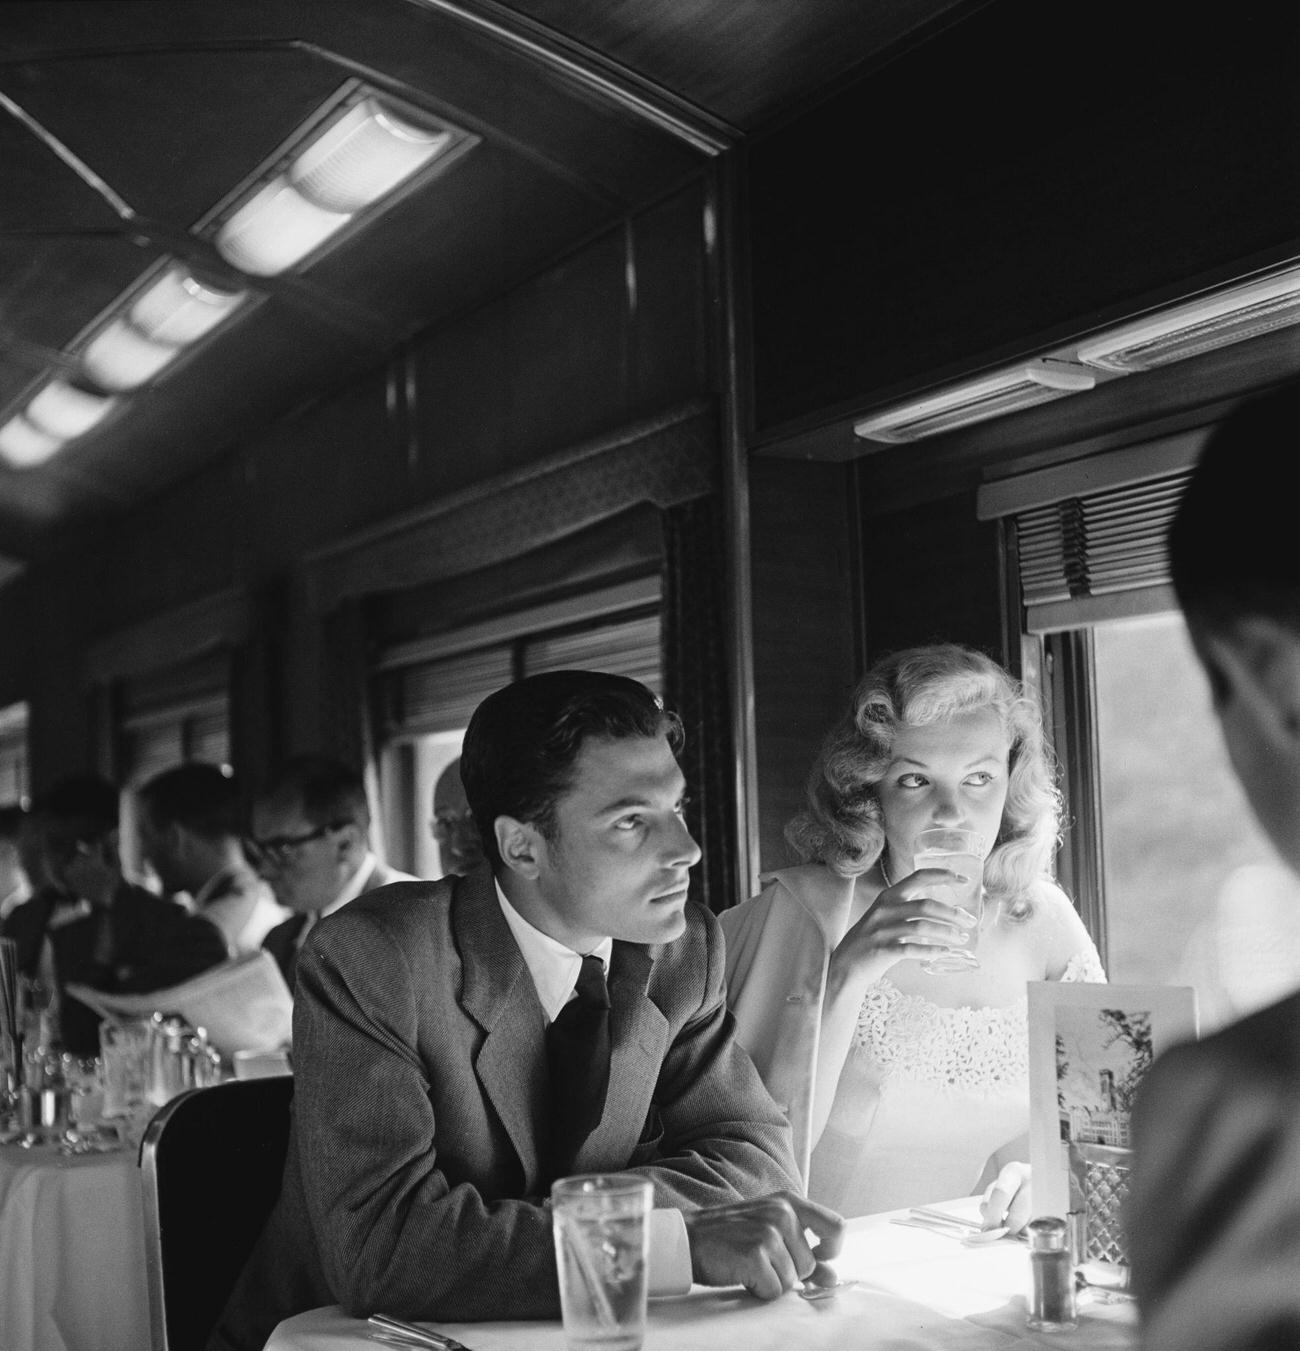 Marilyn Monroe and actor Lon McAllister on a train from New York City to Warrensburg, New York, June 1949.